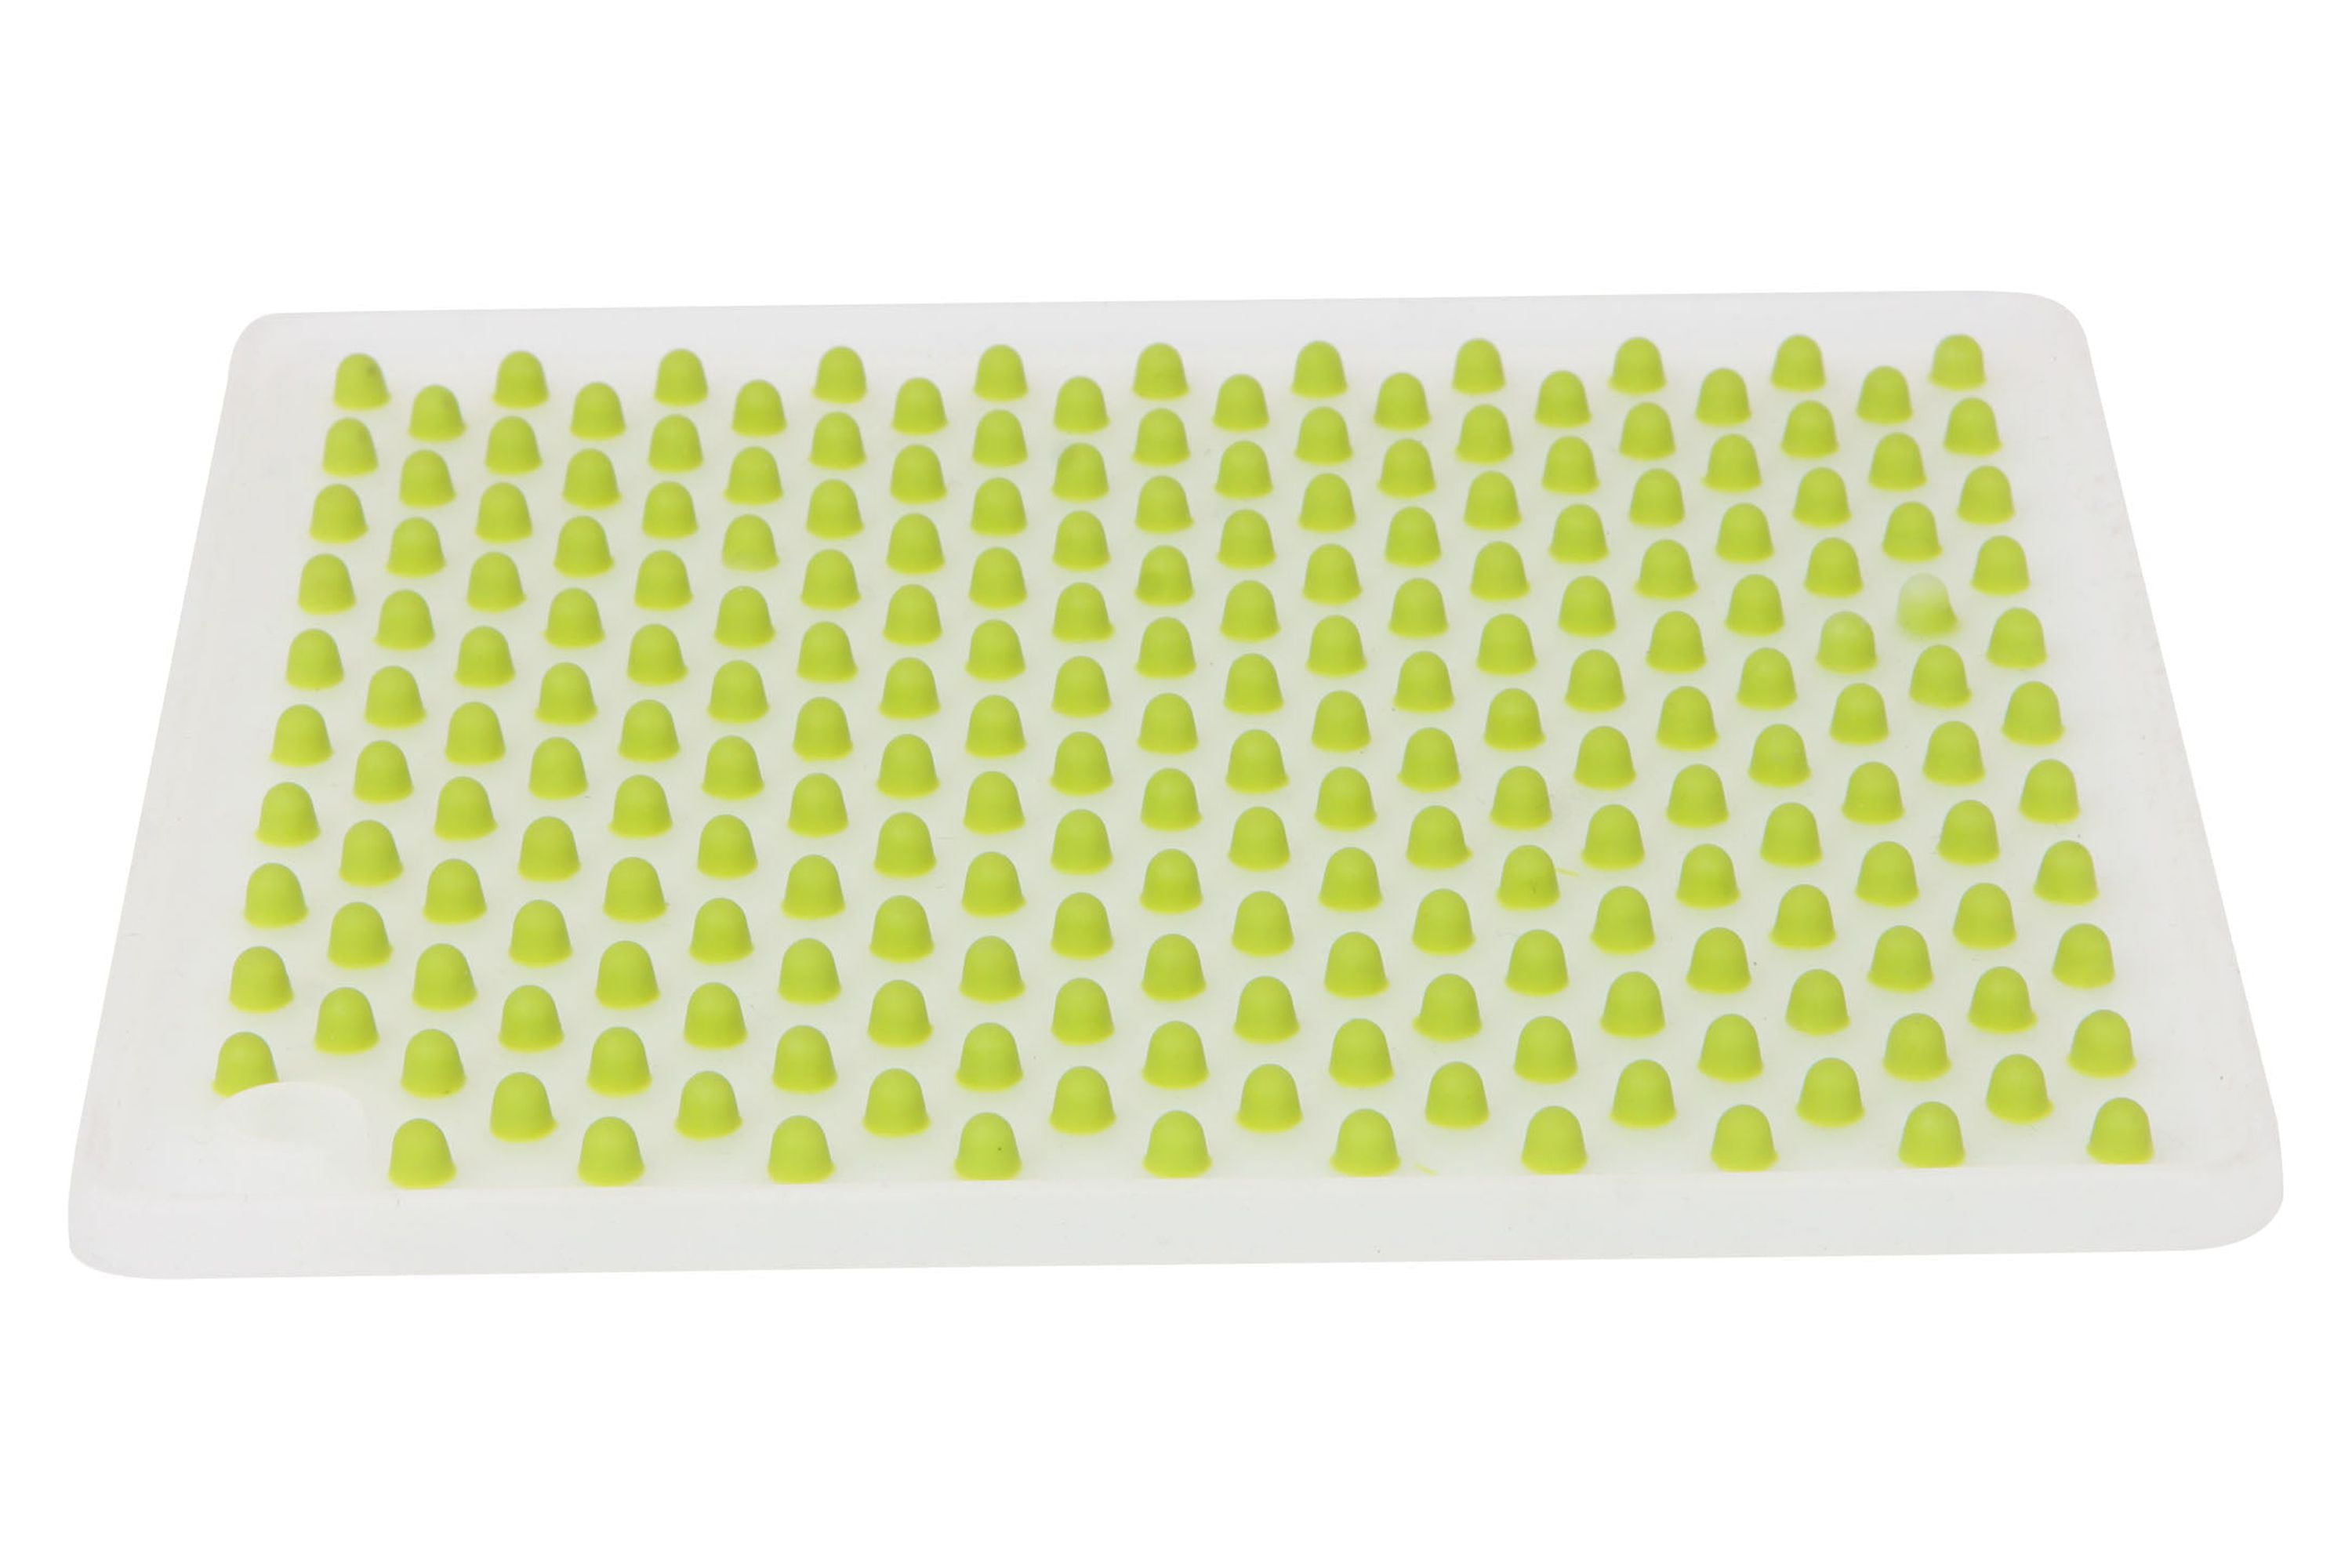 Dexas Elevated Silicone Cooking Mat